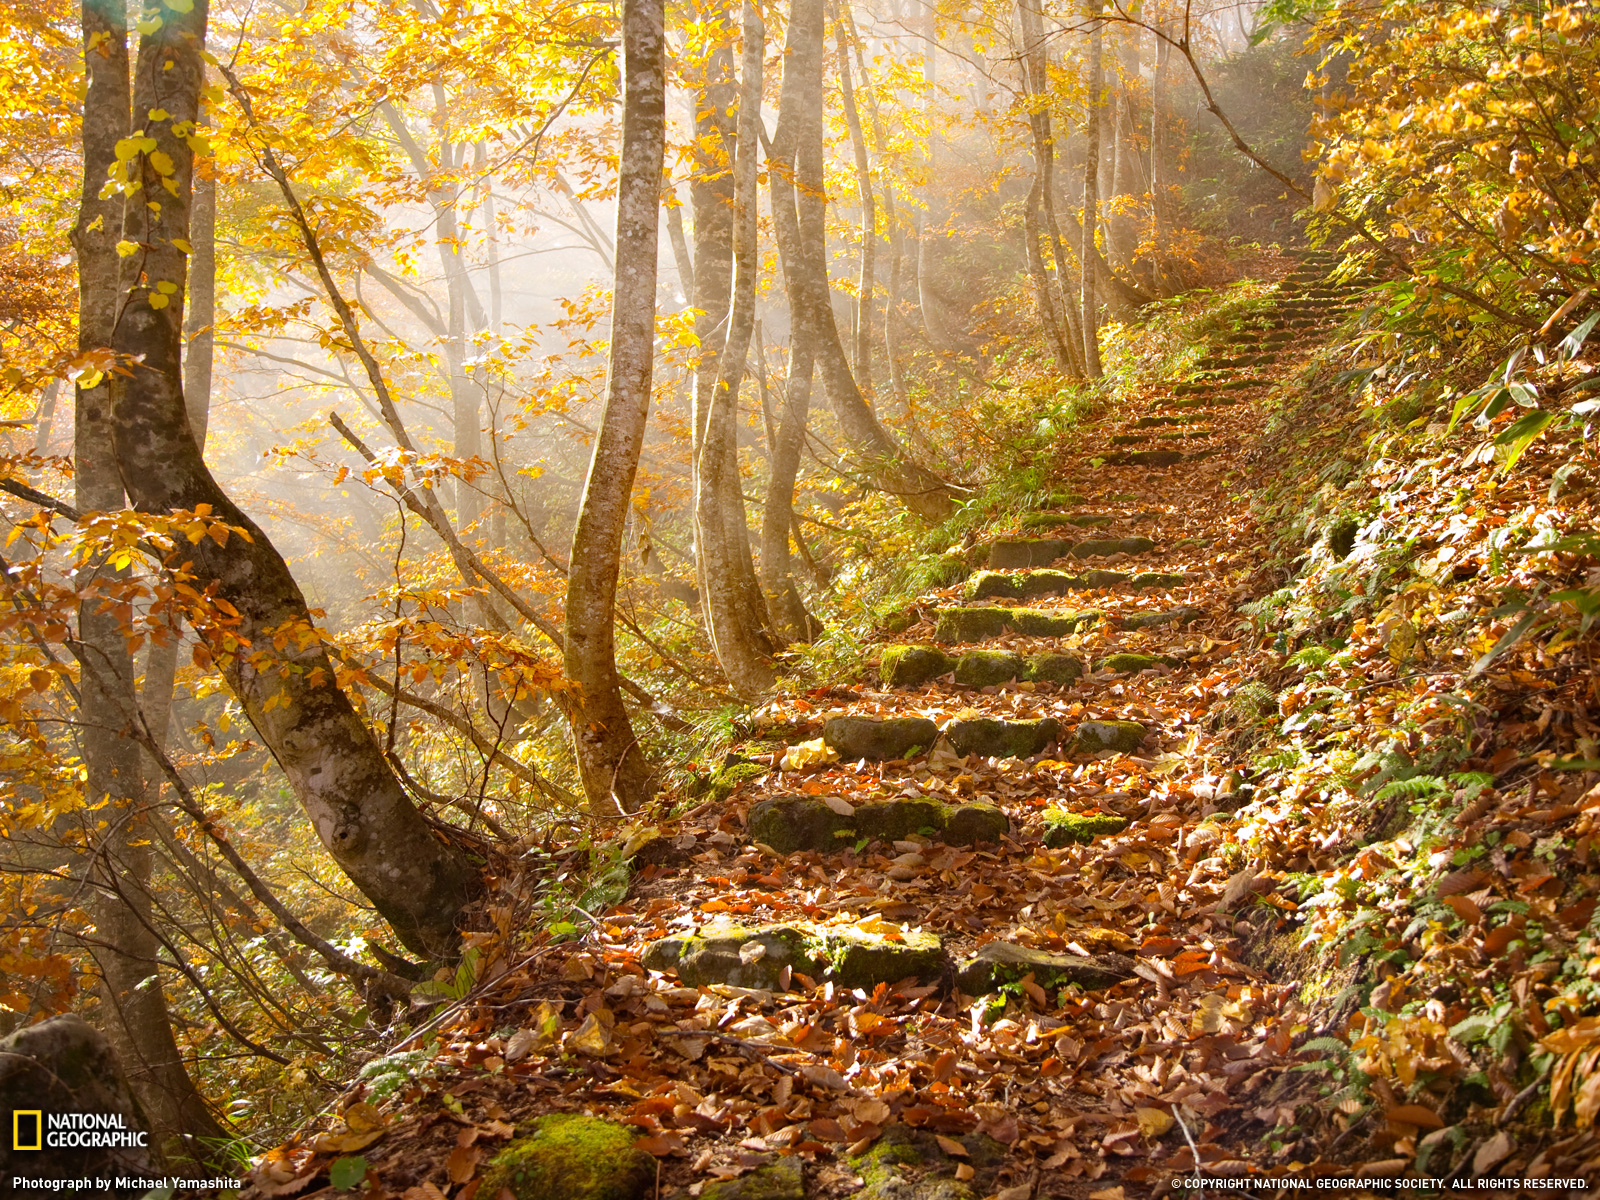 Autumn Leaves Photo Nature Wallpaper National Geographic Of